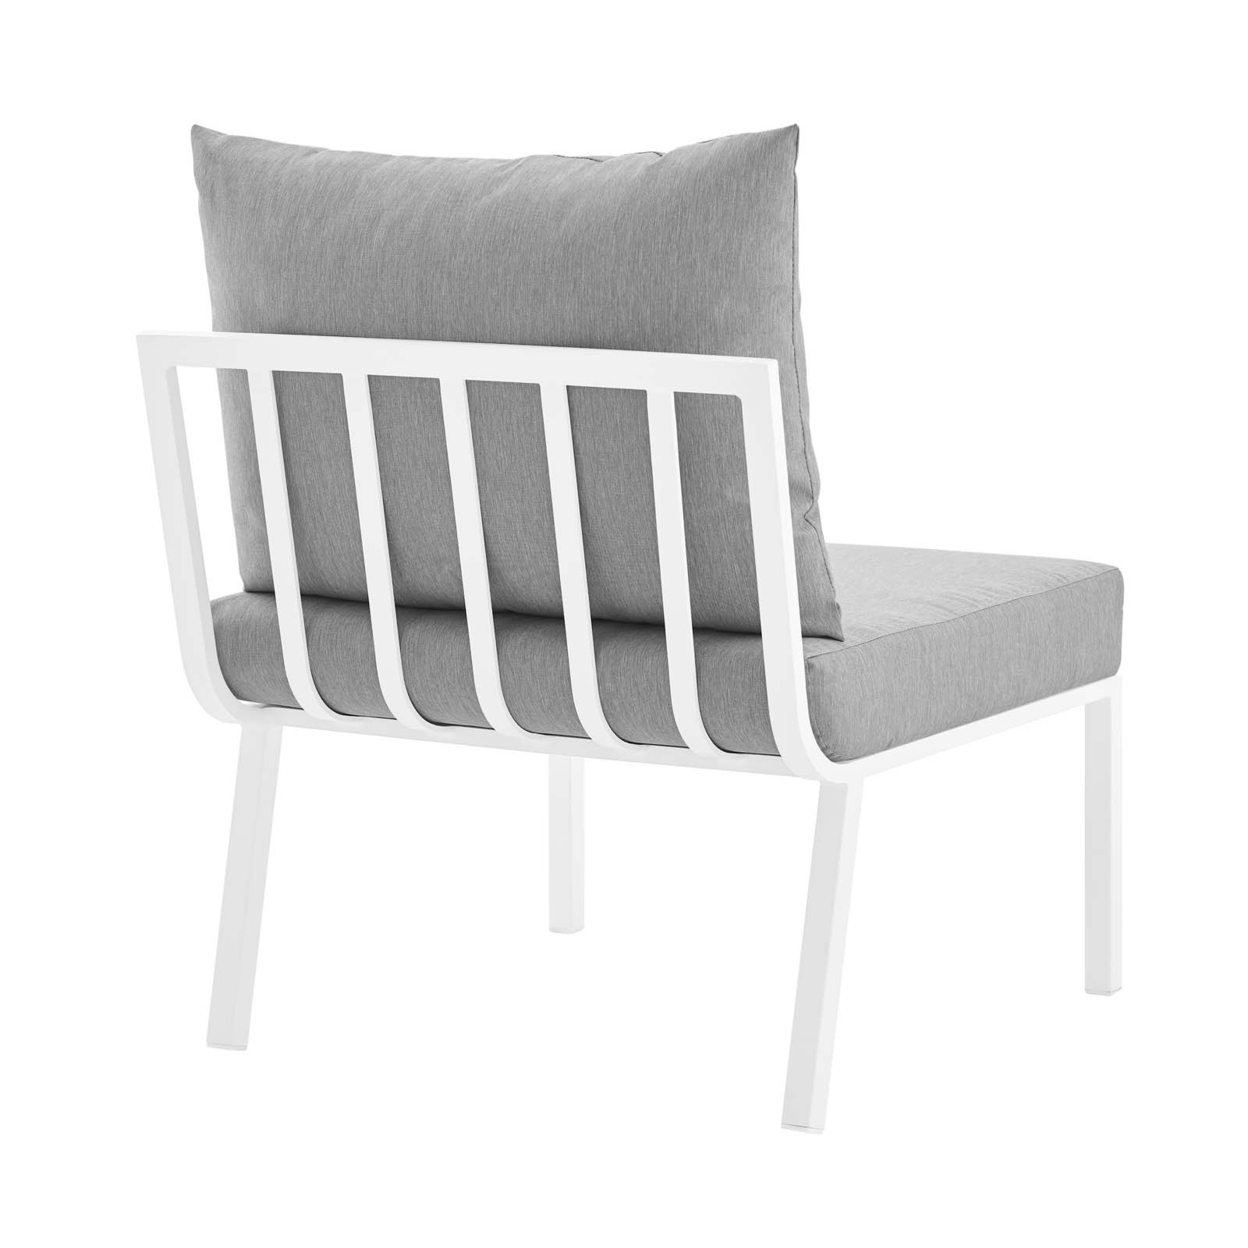 Riverside Outdoor Patio Aluminum Armless Chair,White Gray